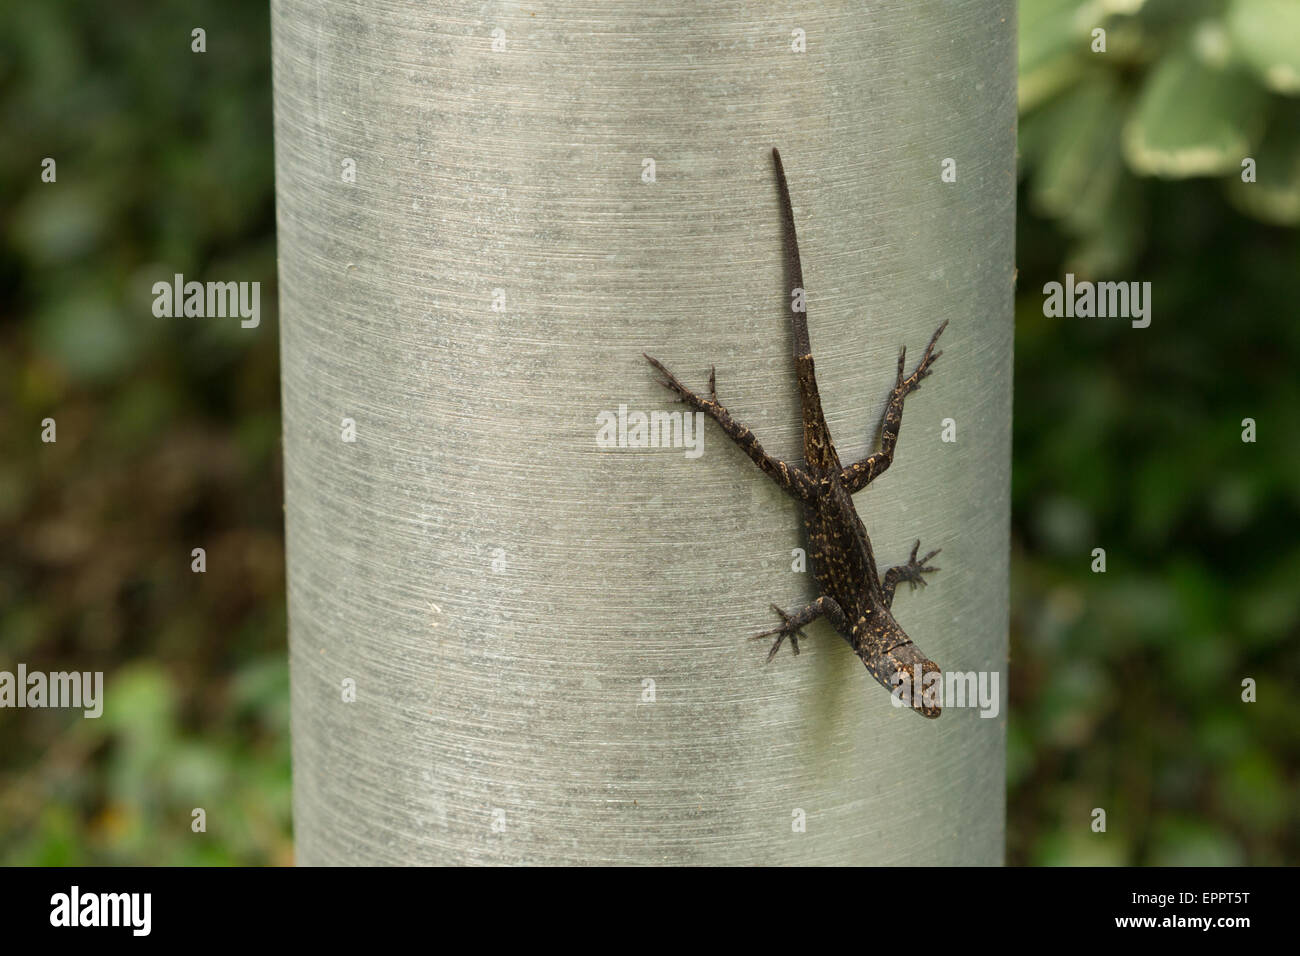 A photograph of a brown anole lizard resting on a metal pole in New Orleans, Louisiana. Stock Photo